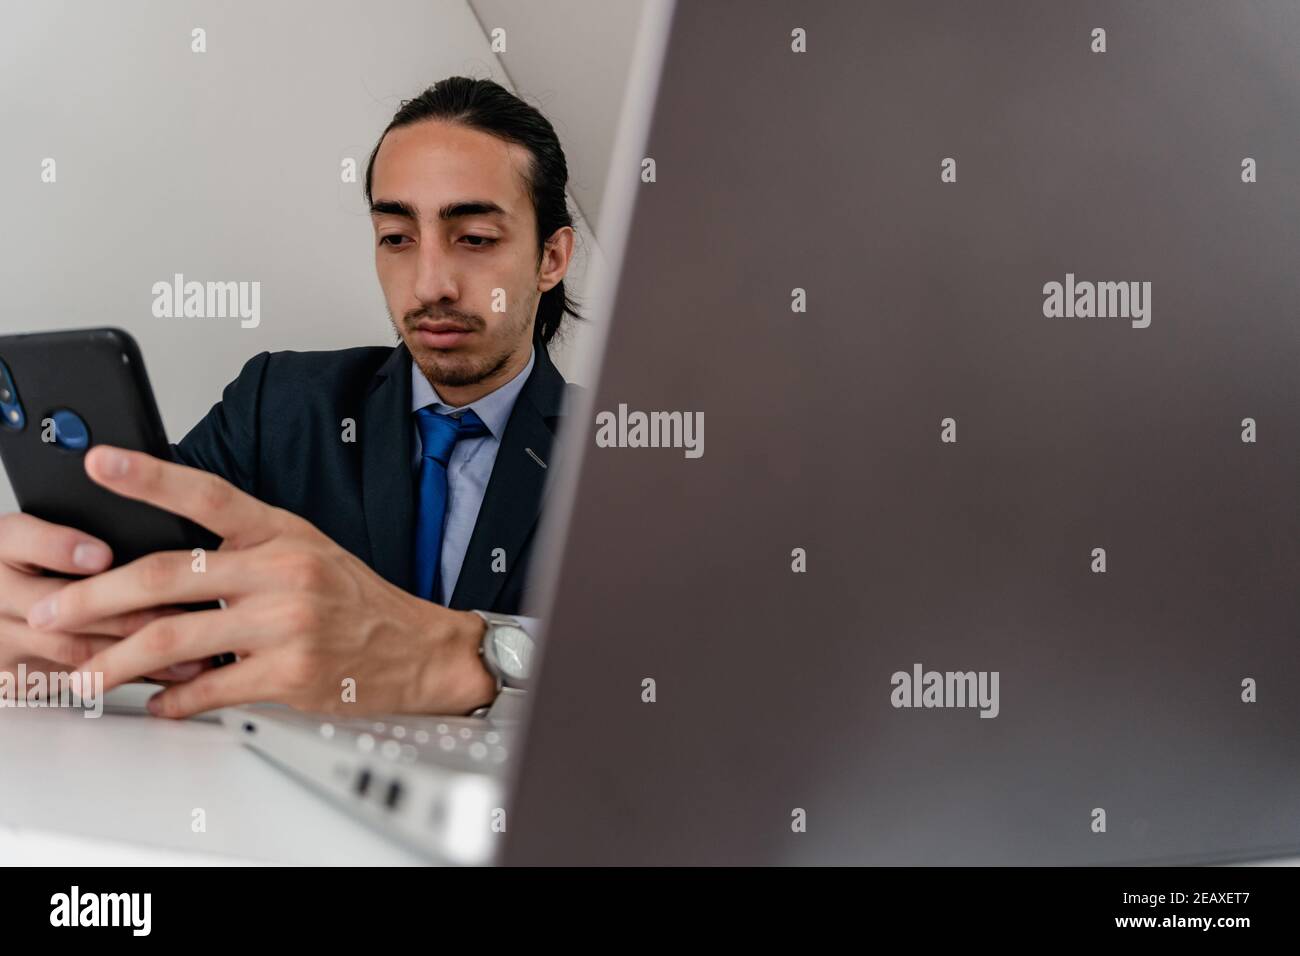 hidden camera captures young businessman working on cell phone and computer, wearing monochromatic blue suit, workday Stock Photo